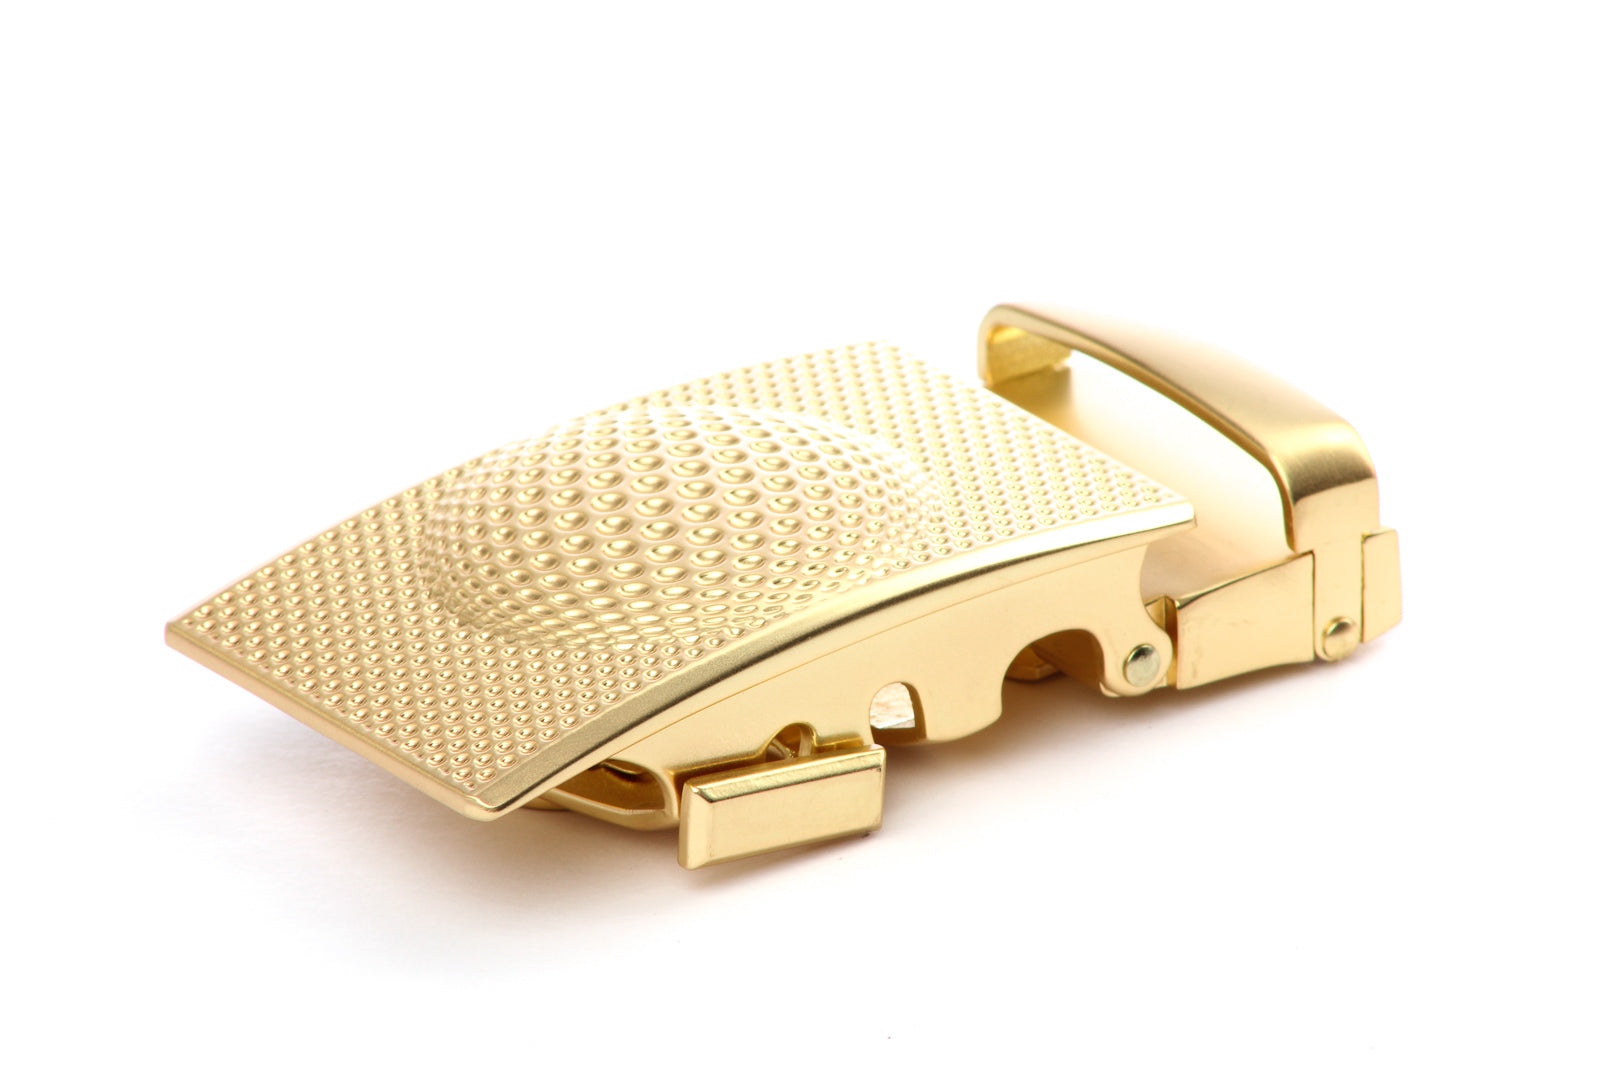 Men's golf ratchet belt buckle in gold with a width of 1.5 inches.